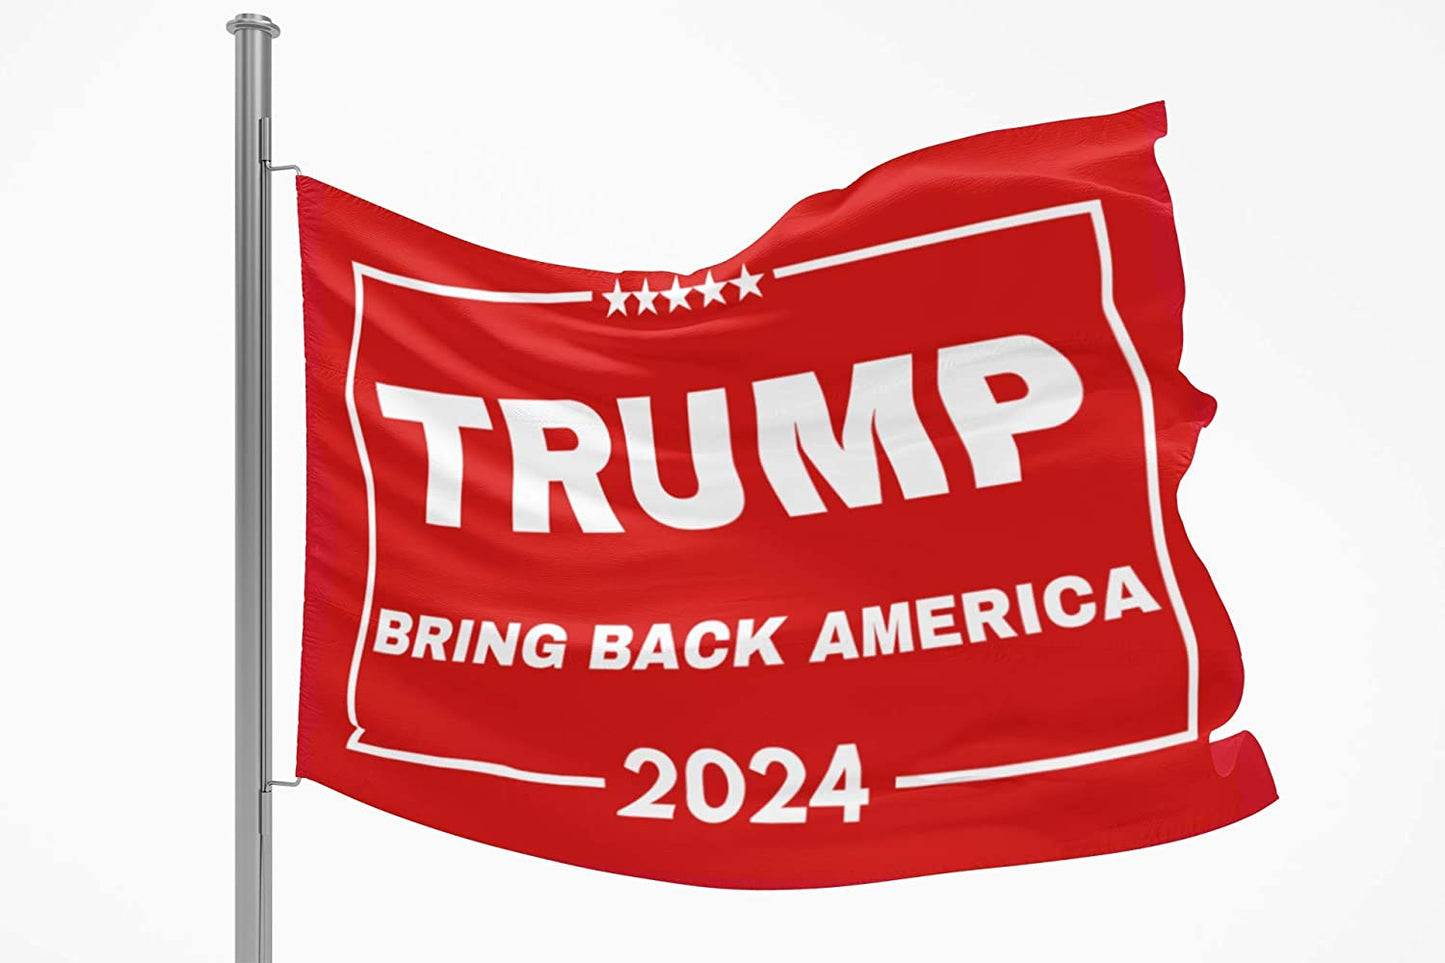 Trump 2024 Flag Bring Back America Red 3x5ft Flag for Donald Trump '24 Save America Supporters - 2 Flags